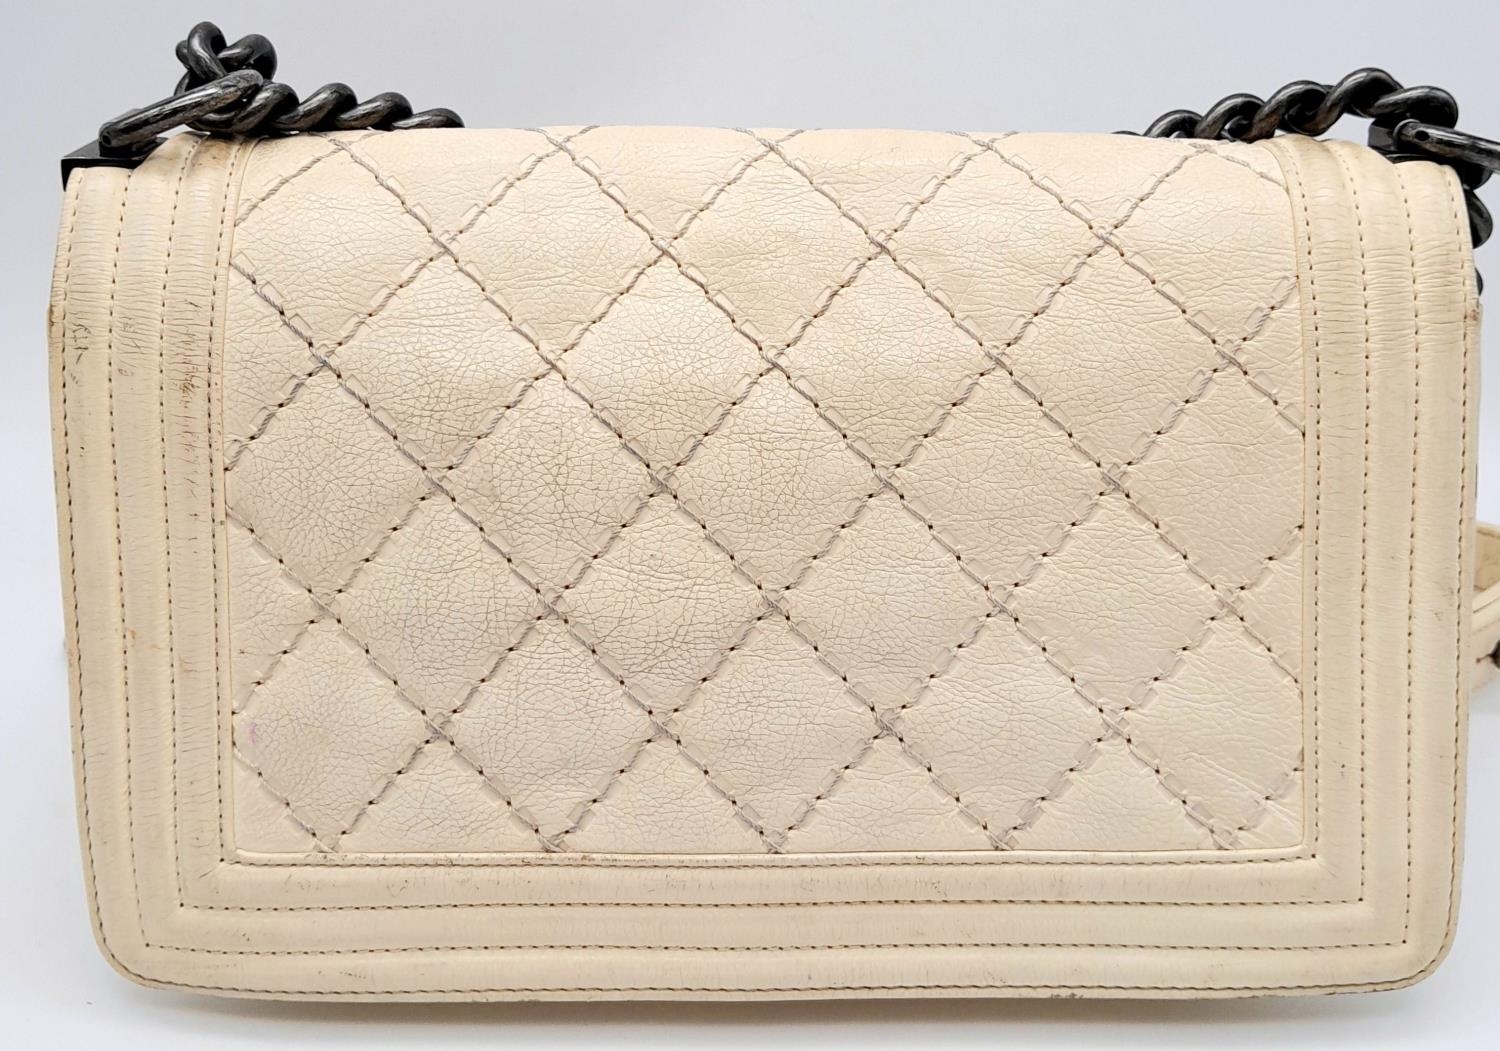 A Chanel Ivory Boy Bag. Leather exterior with chrome-toned hardware, chain and leather strap, and - Image 2 of 15